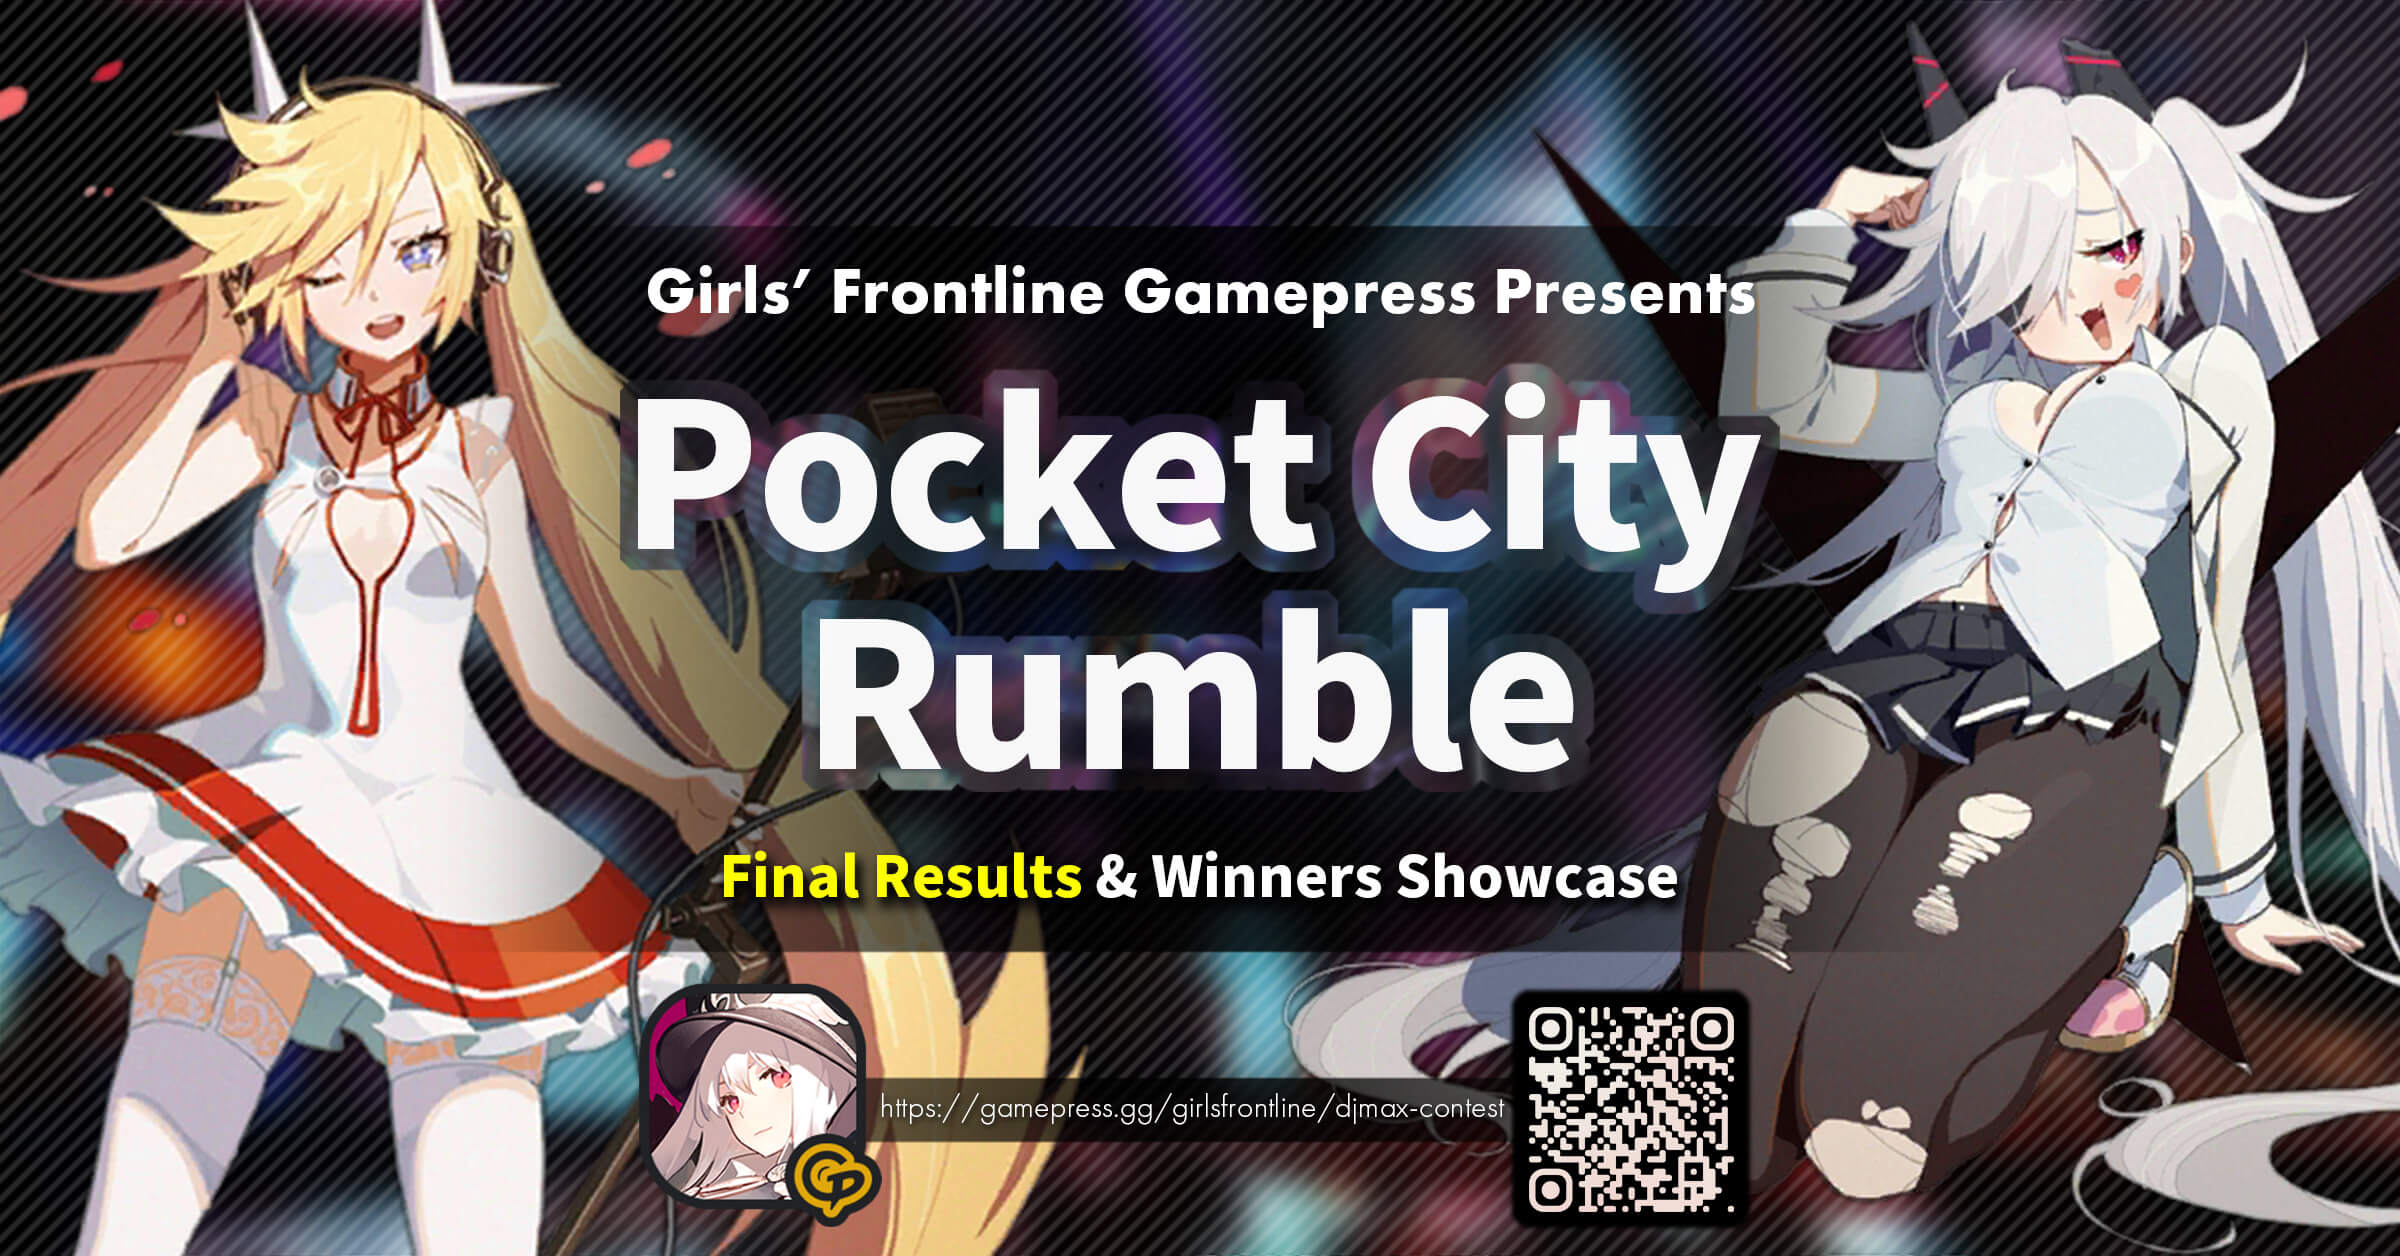 The showcase gallery for winning entries of the "Pocket City Rumble" Girls' Frontline x DJMax "Glory Day" Community Boss Takedown event! Thanks to everyone for joining!